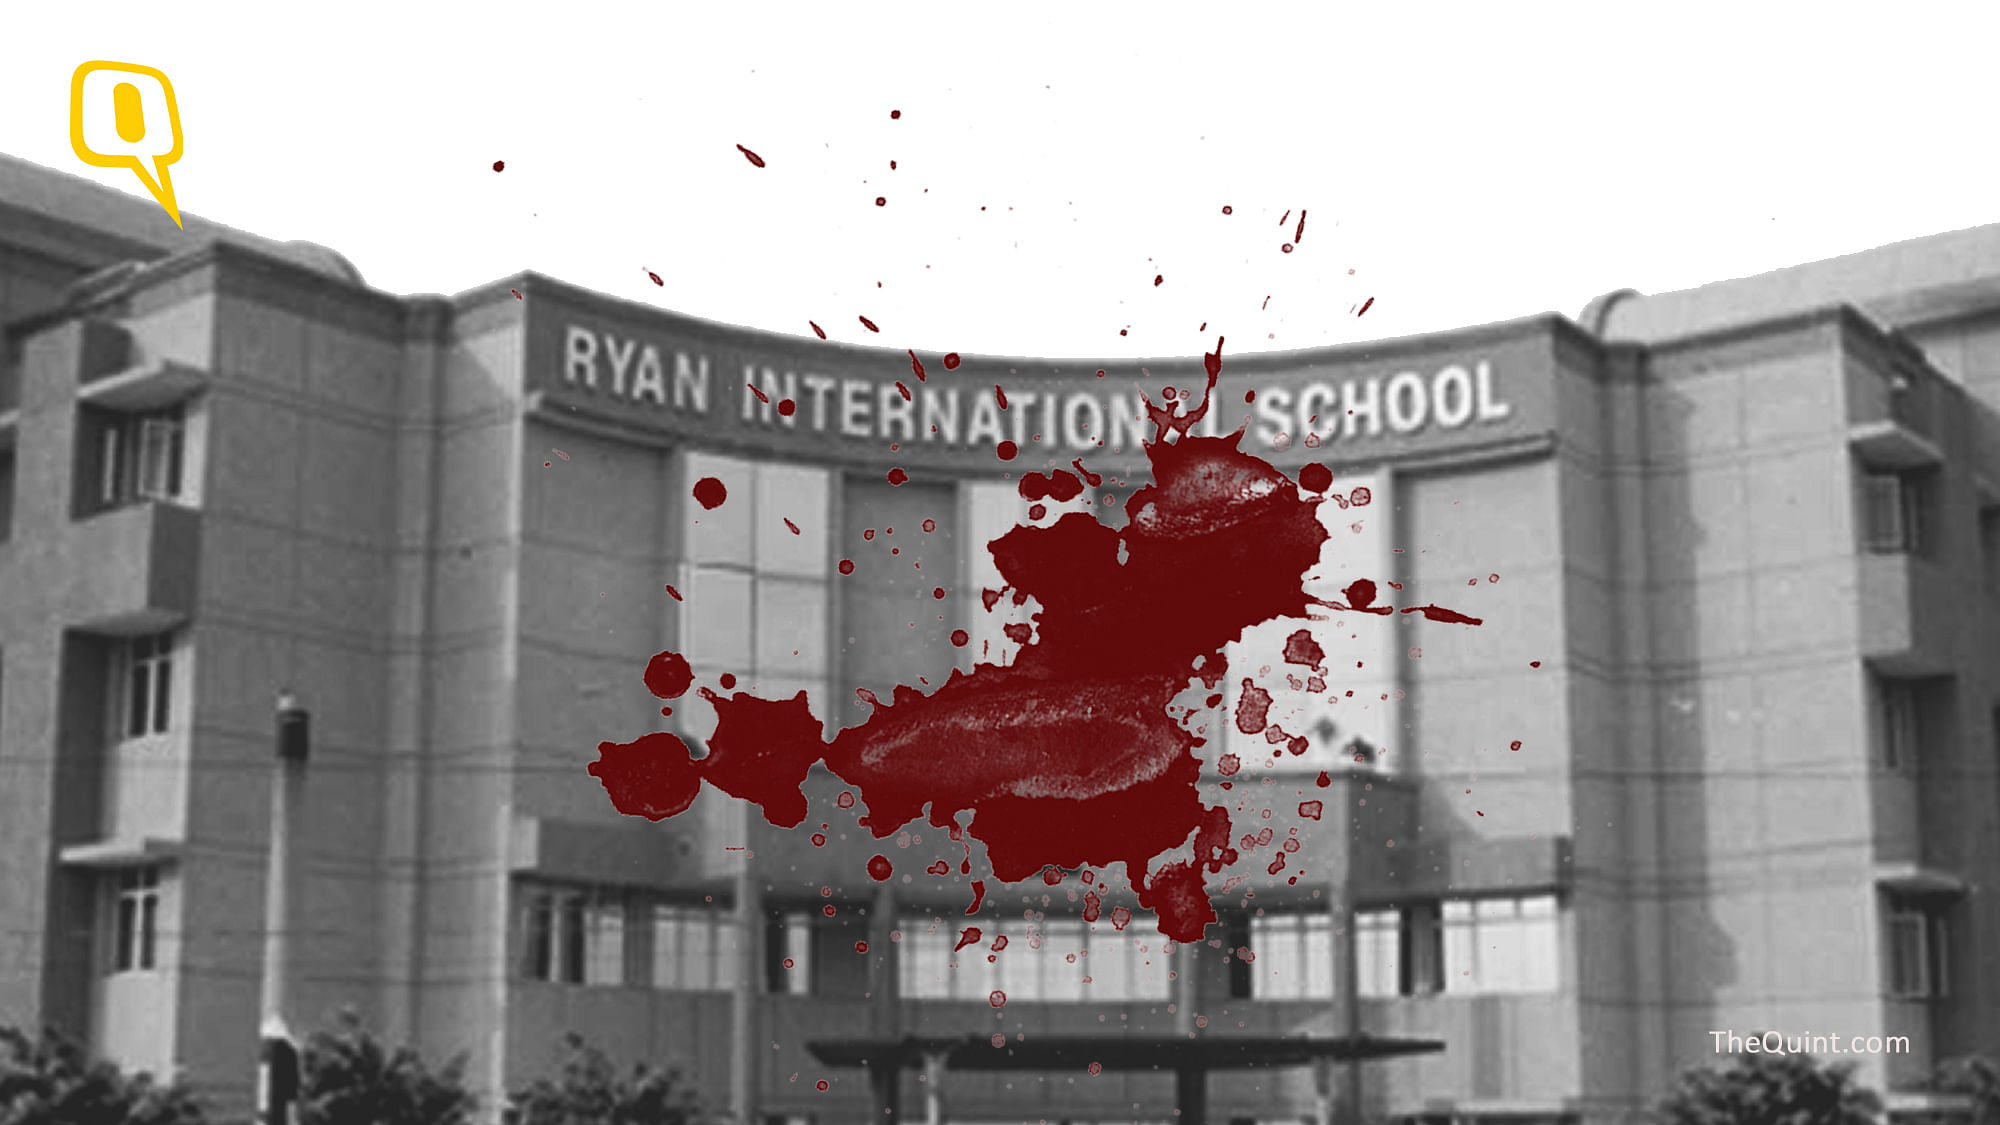 

The story of the Ryan International Group of Institutions’ unbridled success in India is one for the books and begs the question: What is the hidden cost of that success?